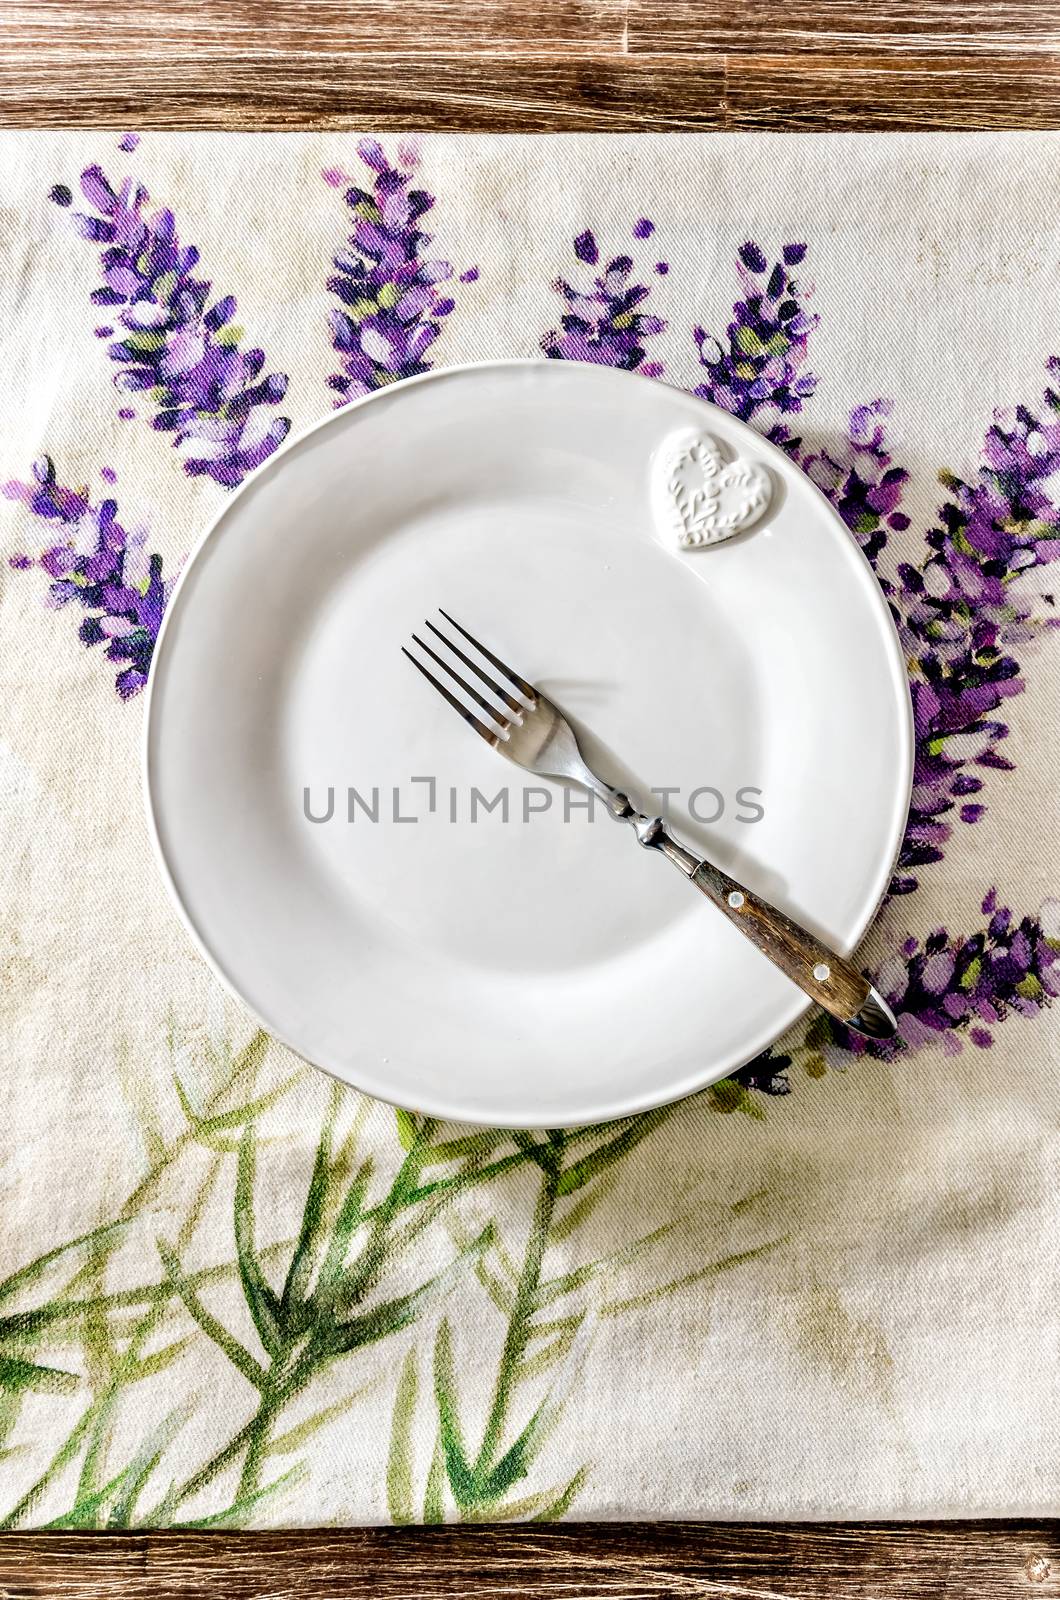 Plate and fork on vintage wooden dining table with colorful tablecloth